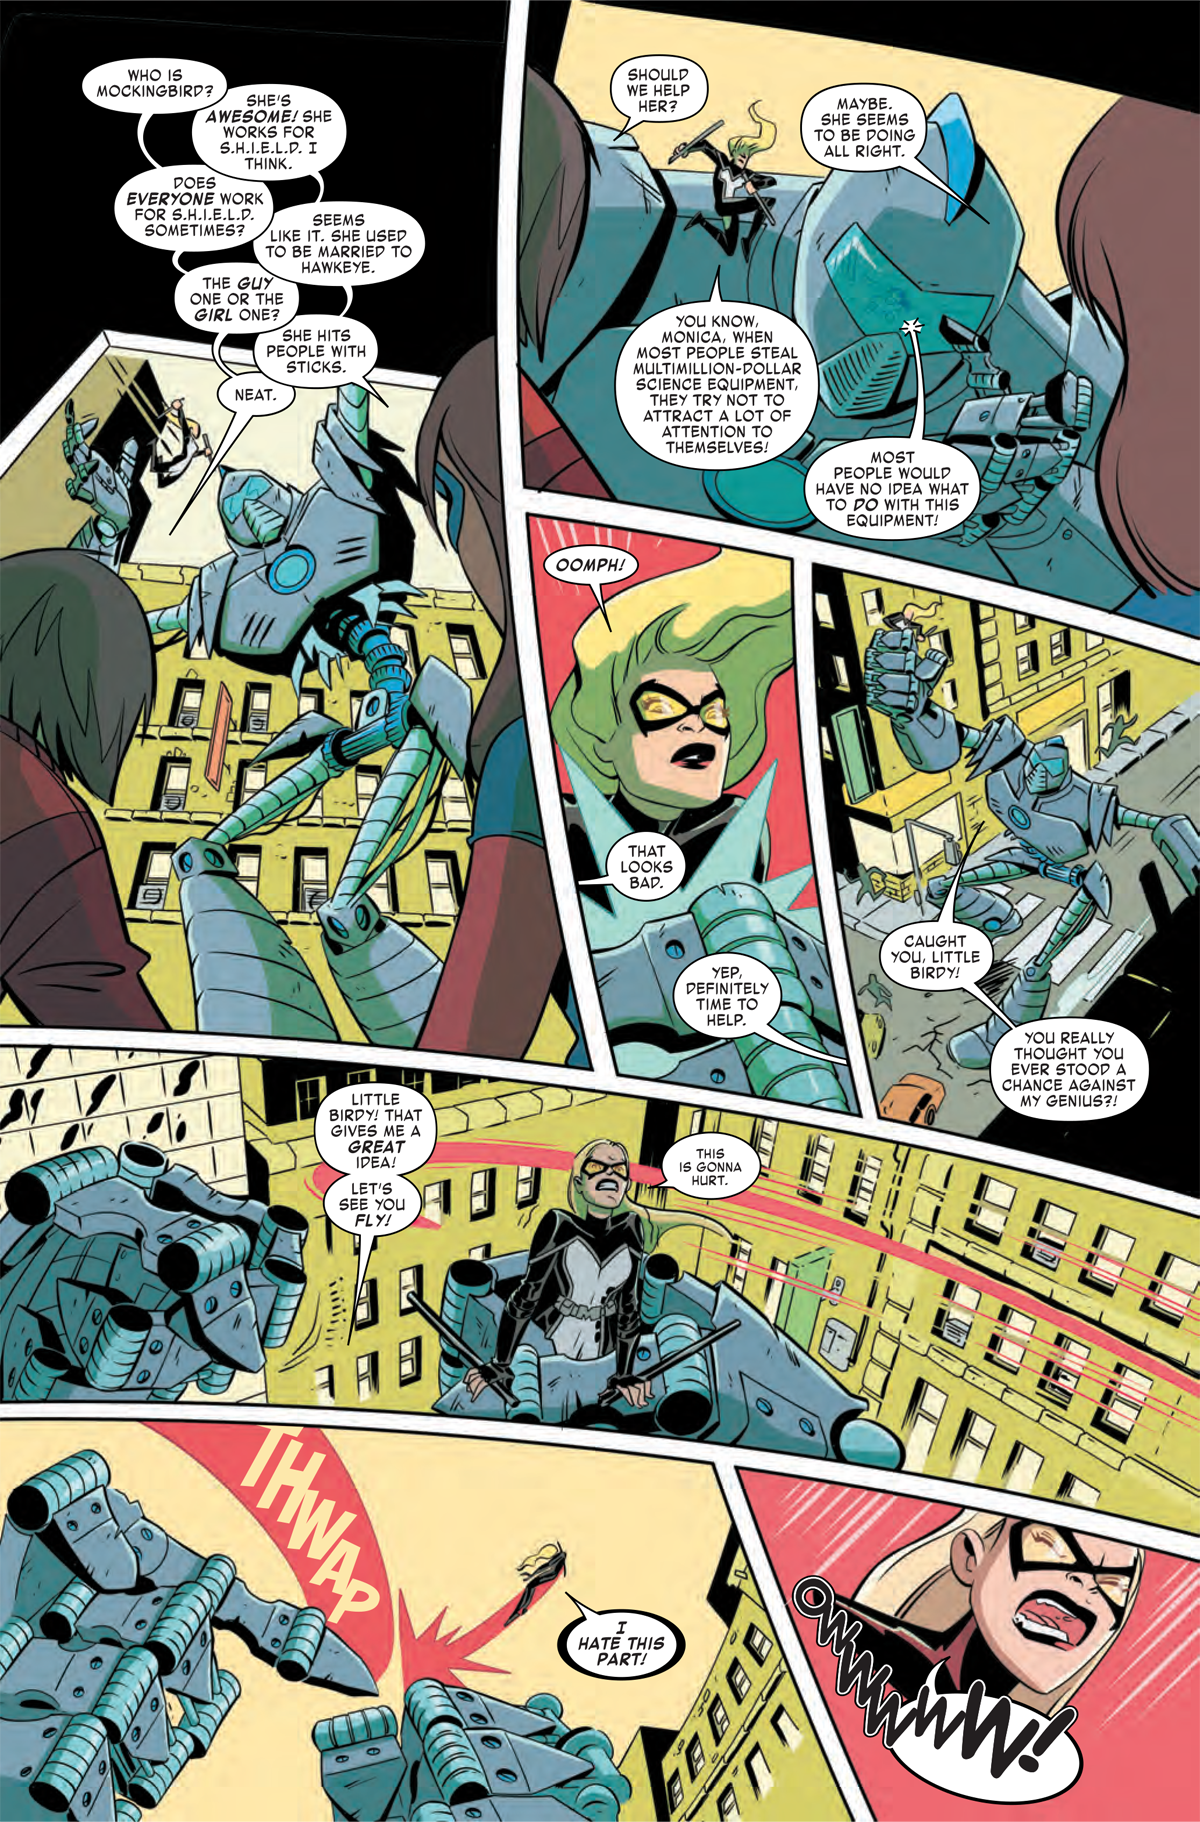 How Nadia Pym Brings Science And Optimism To The Marvel Universe In The Unstoppable Wasp